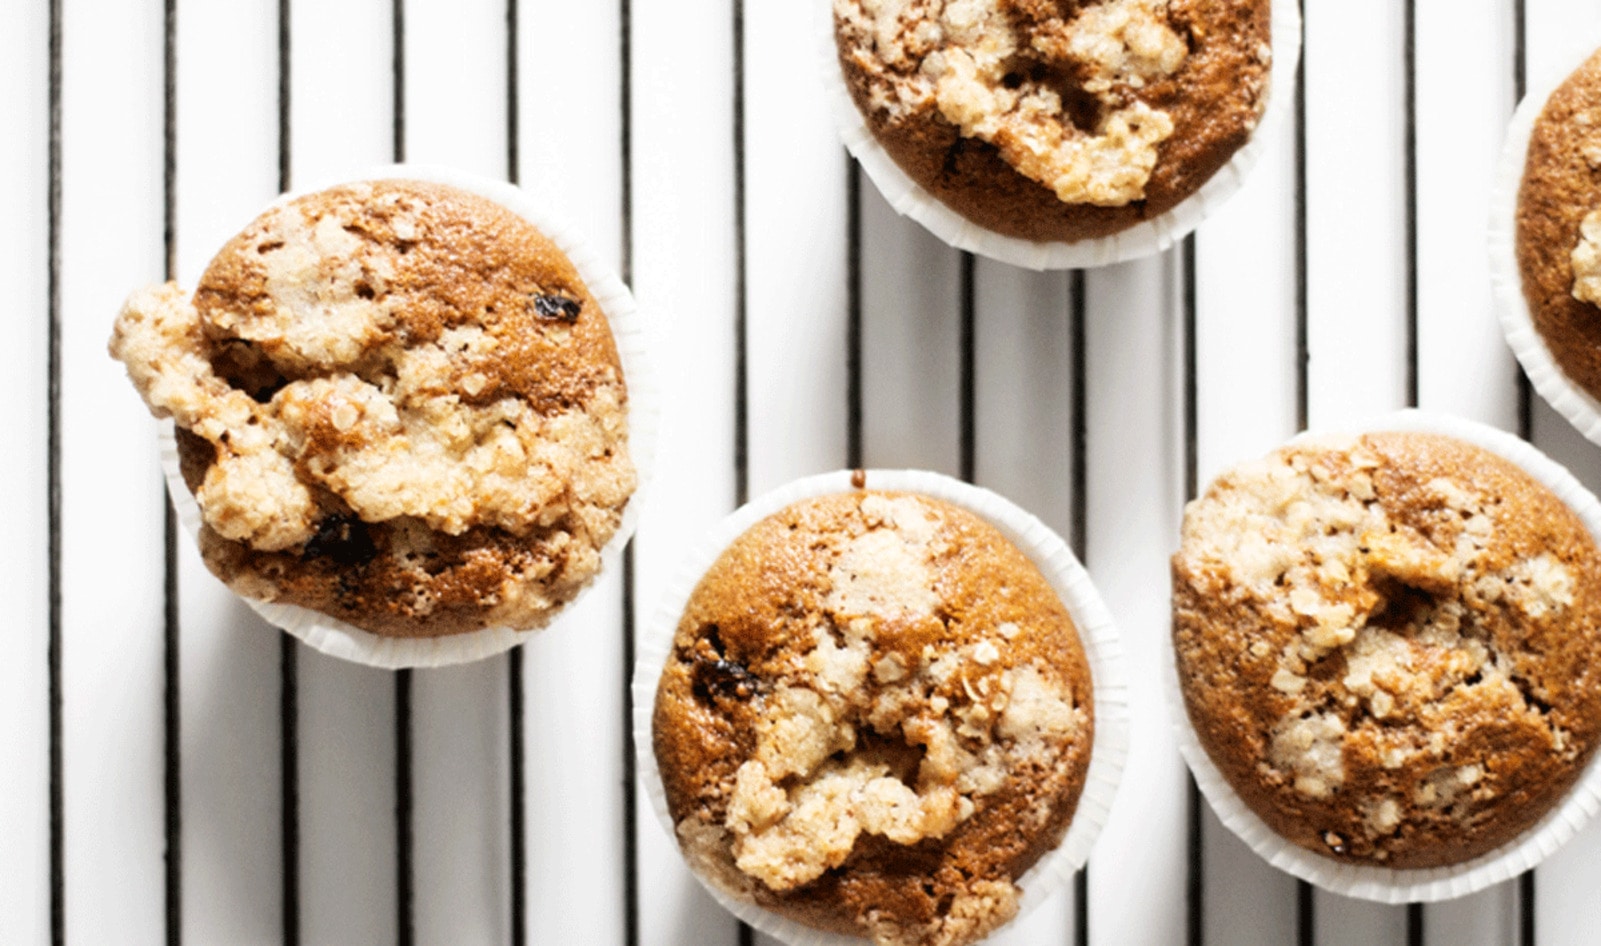 10 Vegan Muffins to Feed the Hungry on National Muffin Day